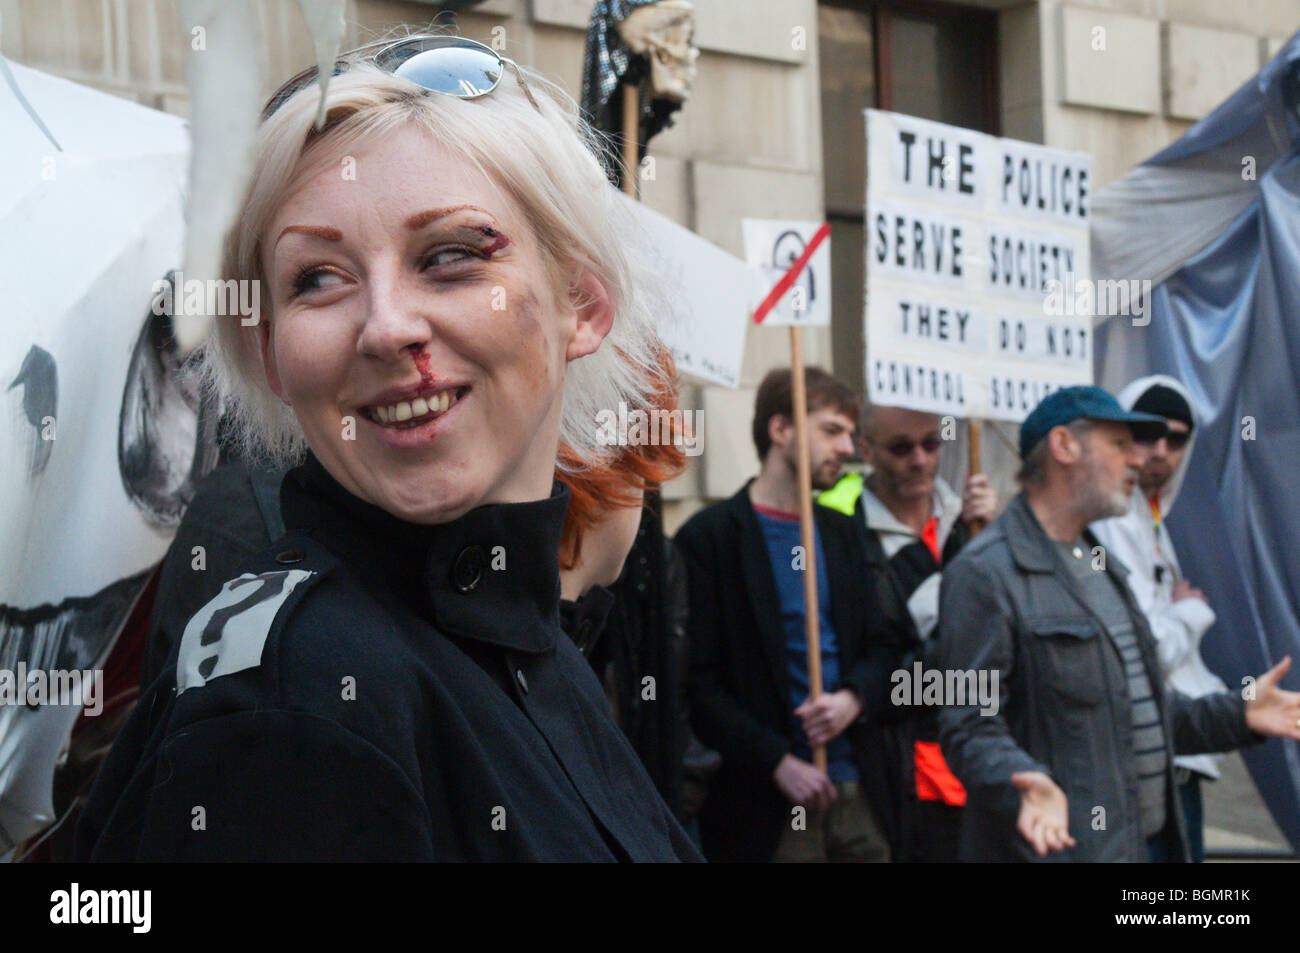 Protest at HQ of City of London Police - woman with facial injuries ...